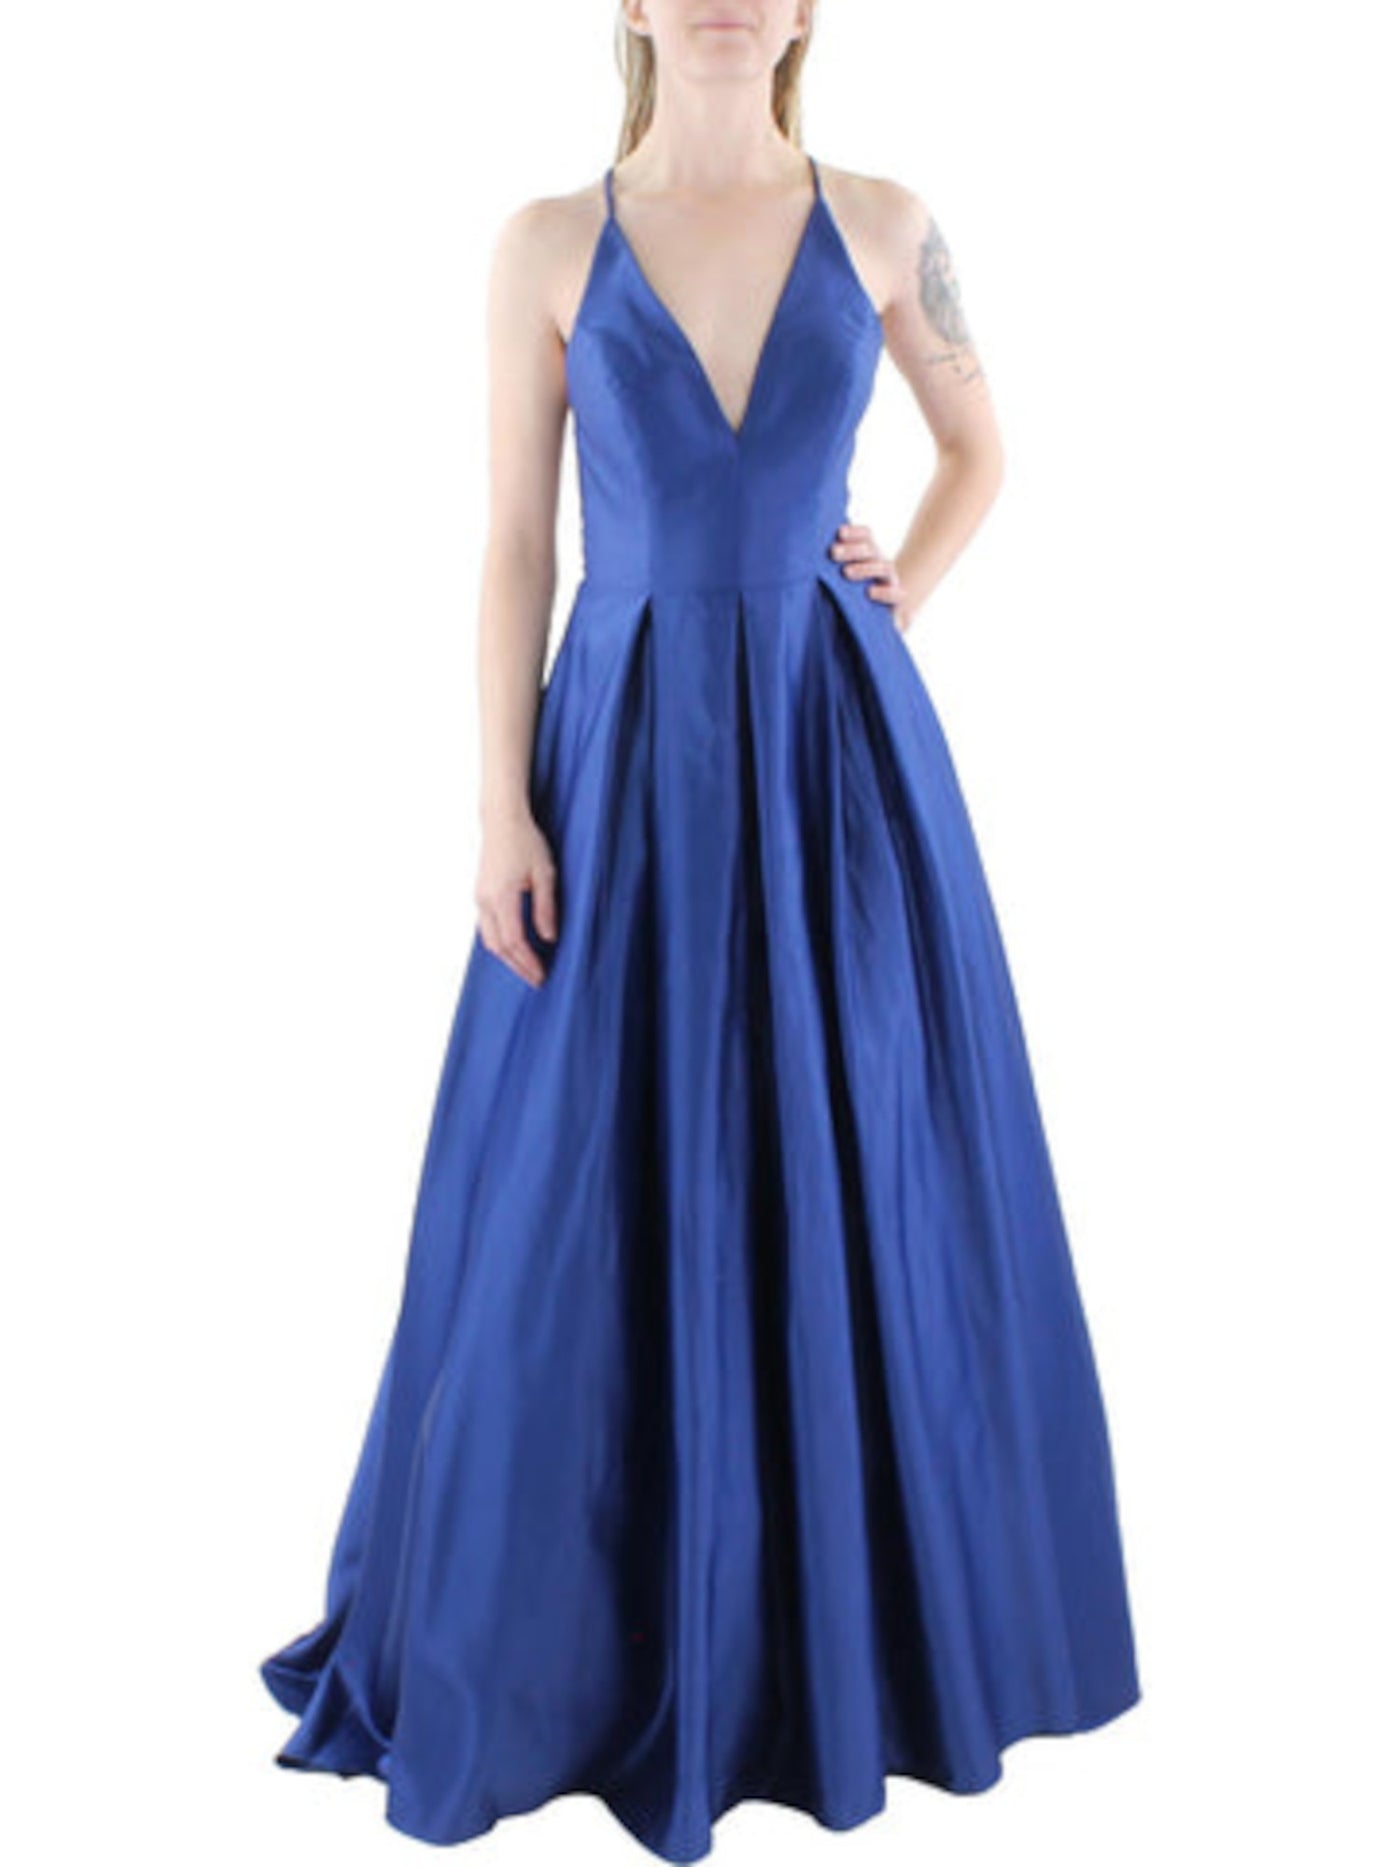 BLONDIE NITES Womens Blue Zippered Pocketed Illusion Strappy Back Bodice Spaghetti Strap V Neck Full-Length Evening Gown Dress Juniors 7